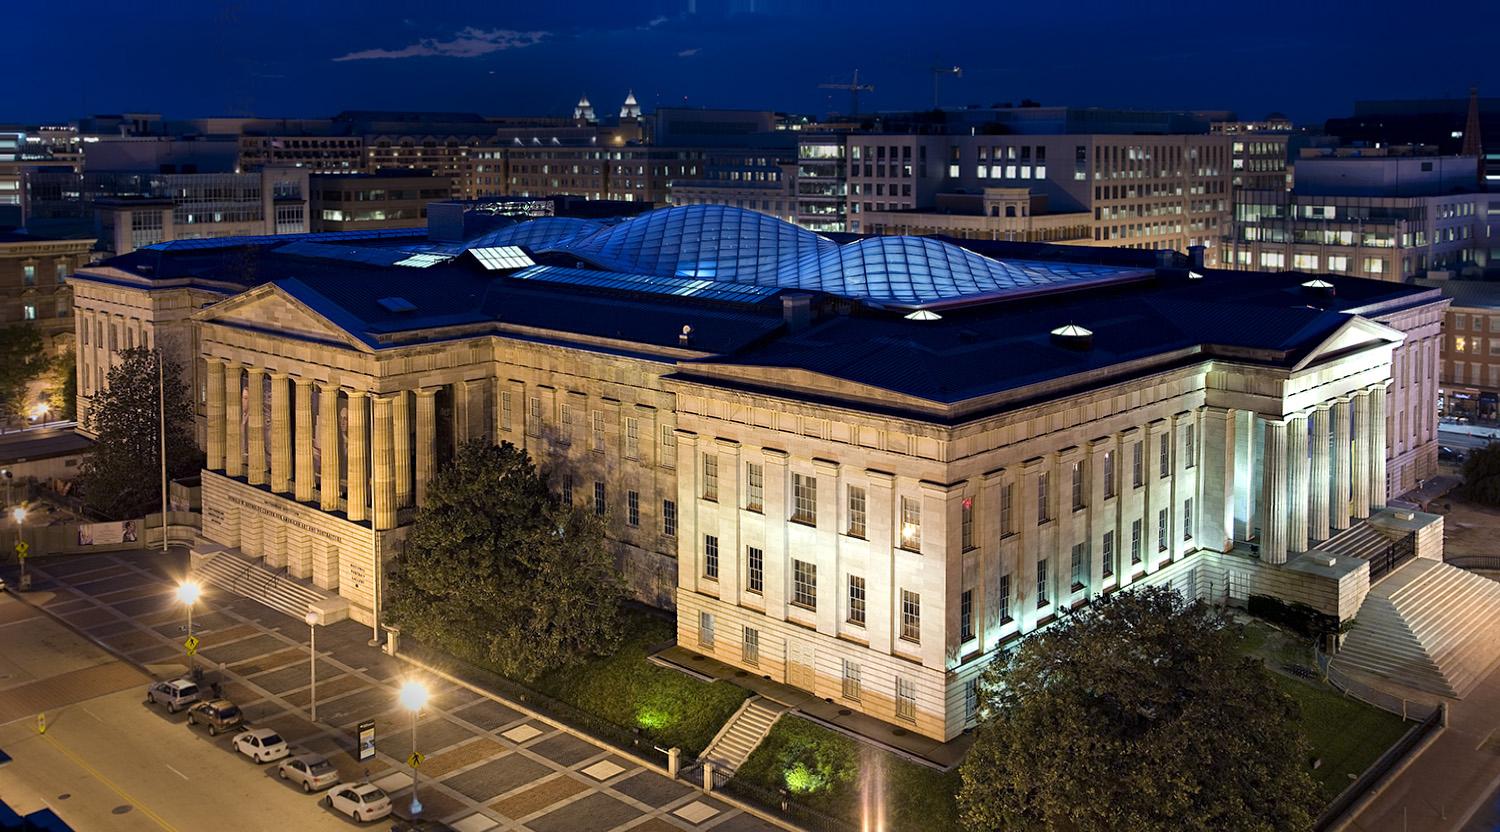 A "day in the life" of the Smithsonian American Art Museum